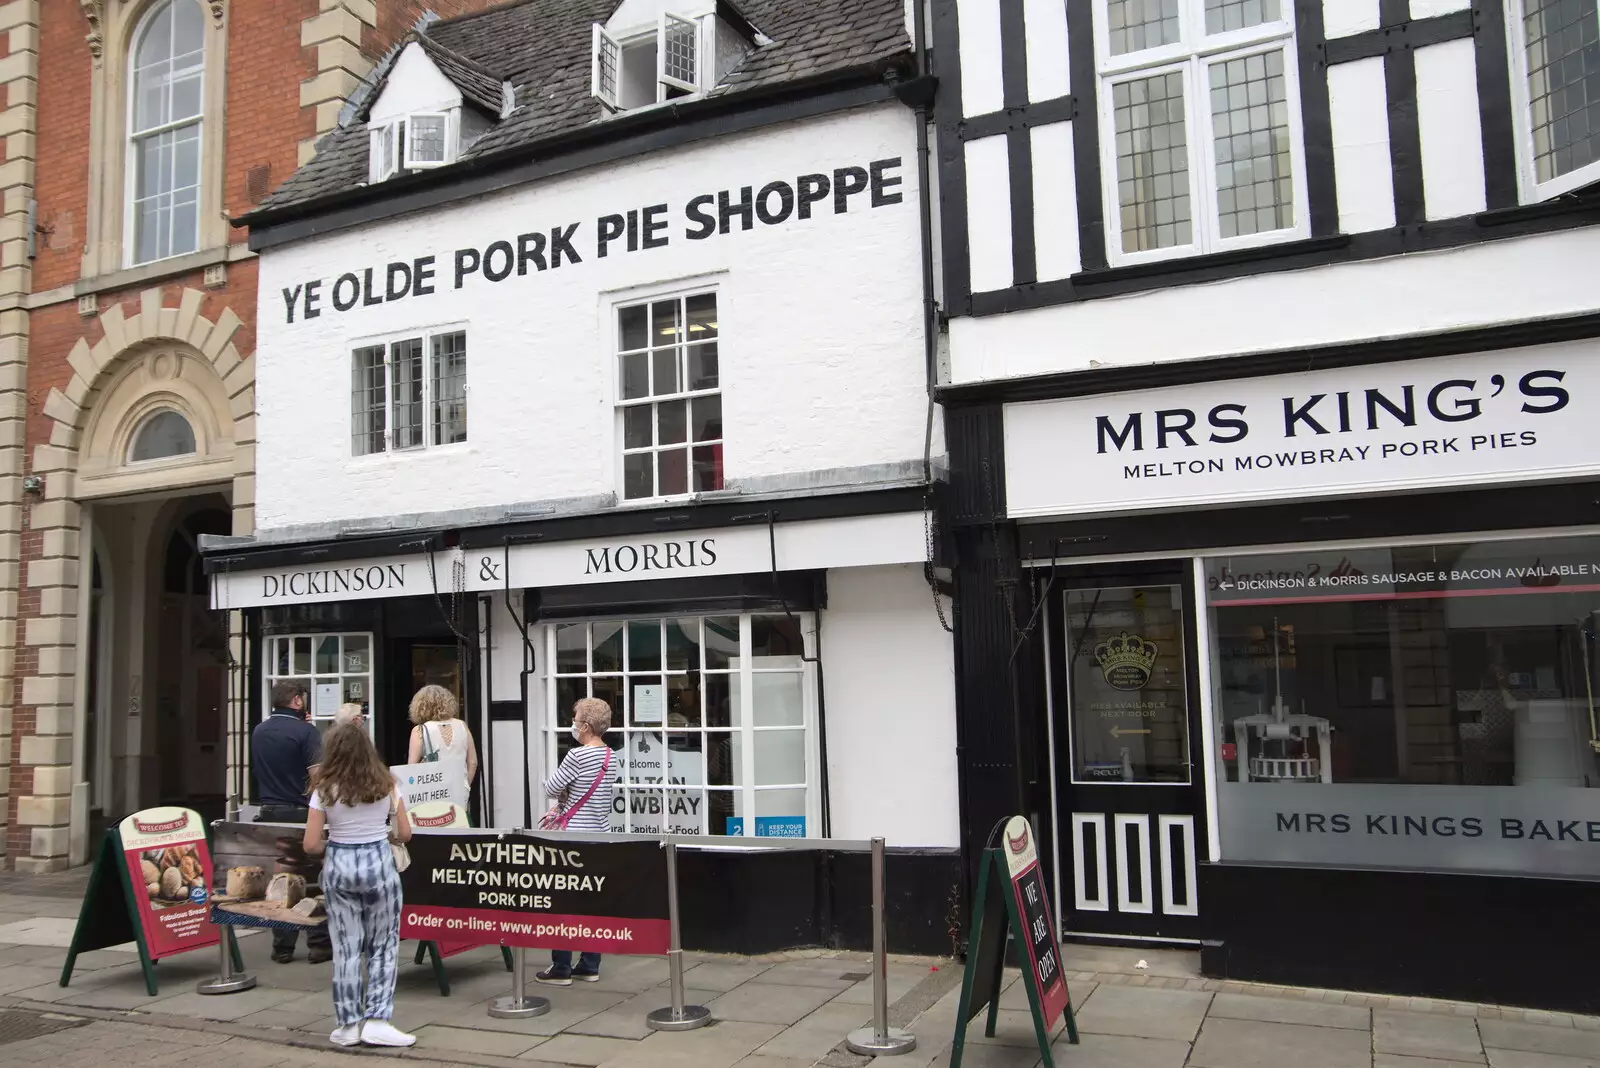 The Dickinson and Mrs King's pork pie shop, from Pork Pies and Dockside Dereliction, Melton Mowbray and Liverpool - 7th August 2021